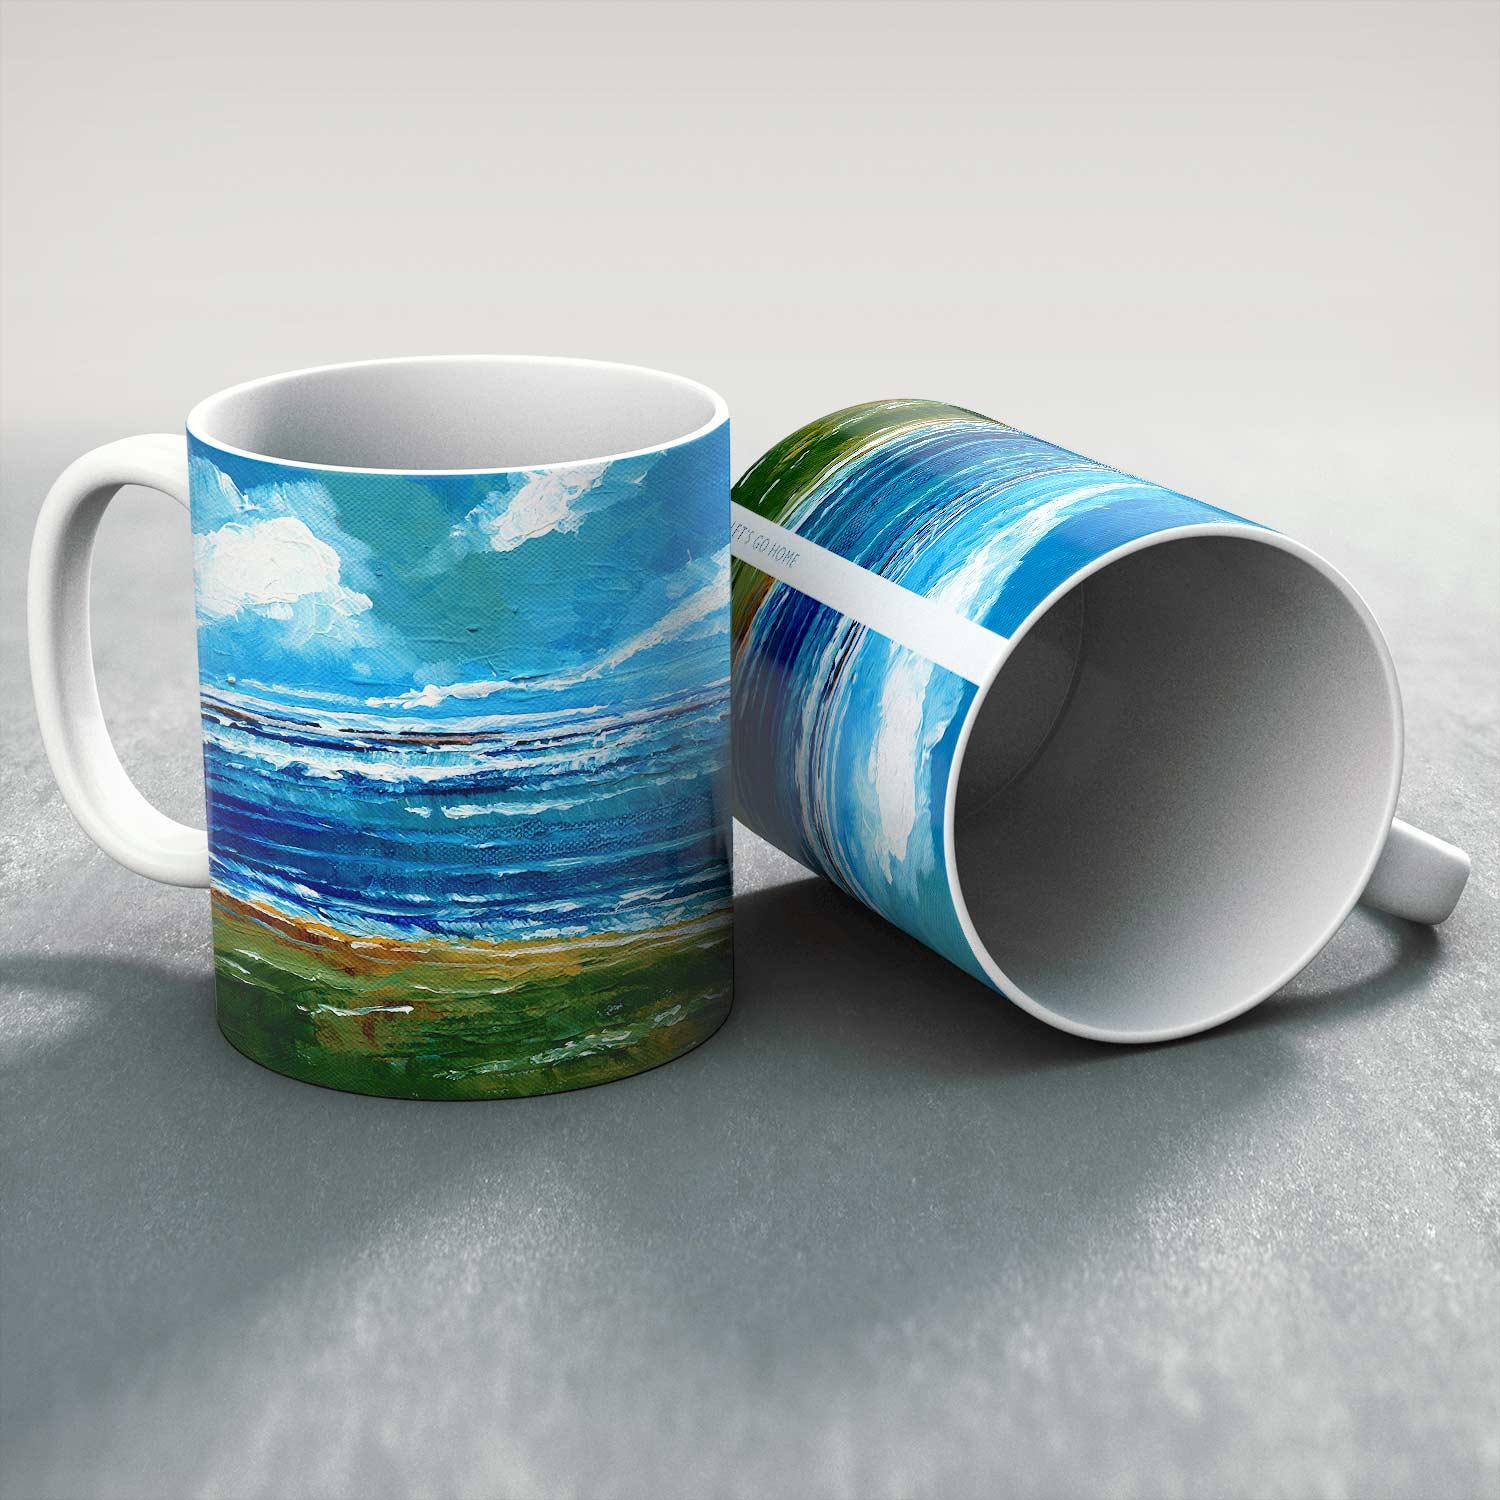 Lets go Home Mug from an original painting by artist Stuart Roy